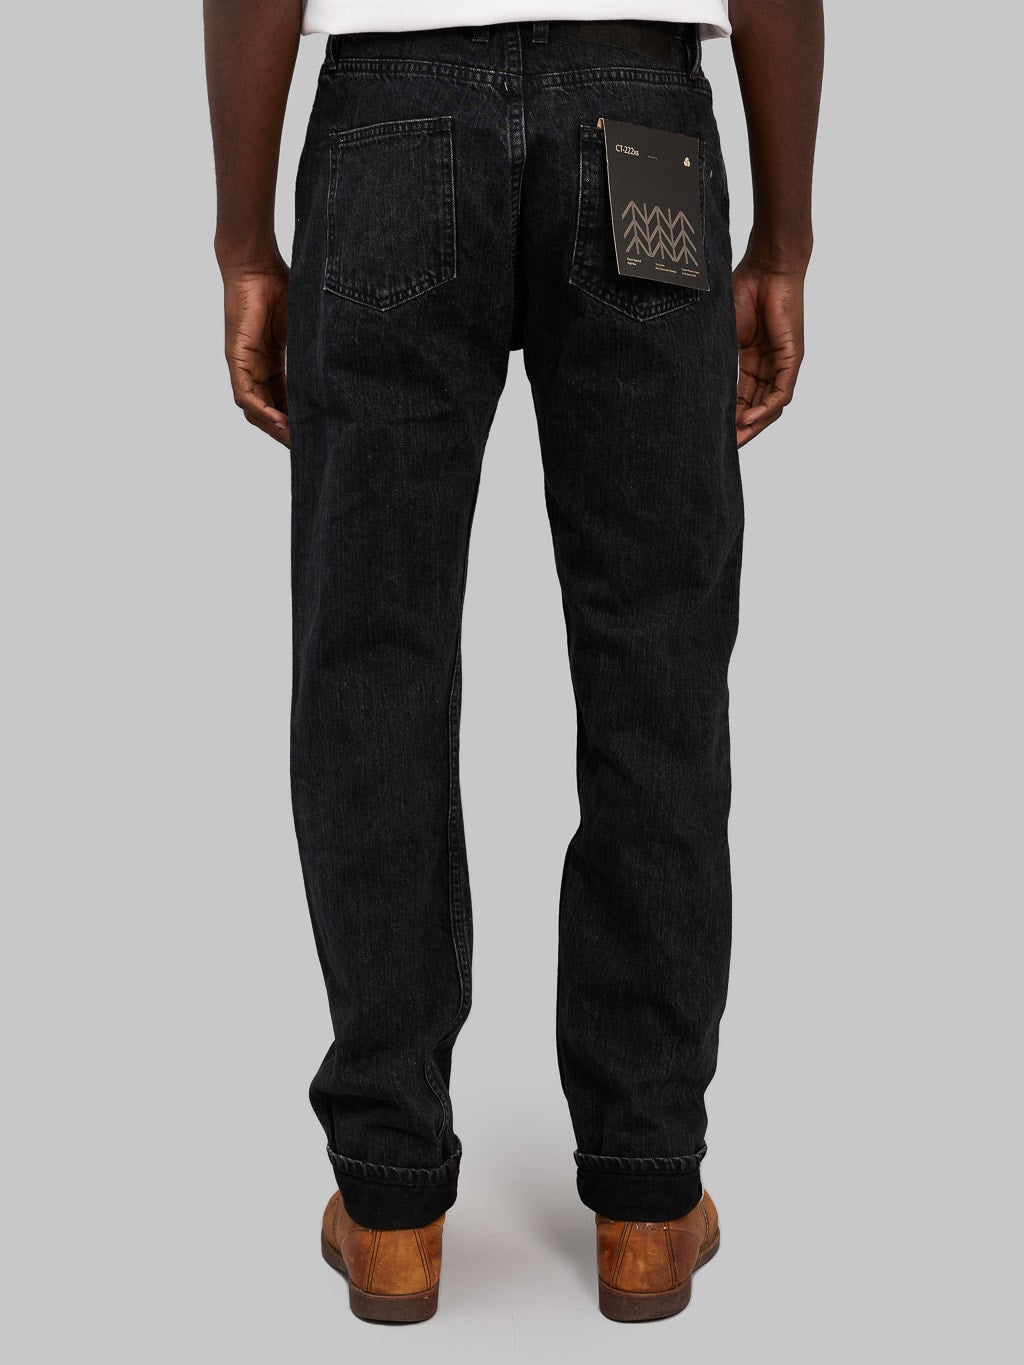 3sixteen CT 220x Classic Tapered Stonewashed Double Black back fit